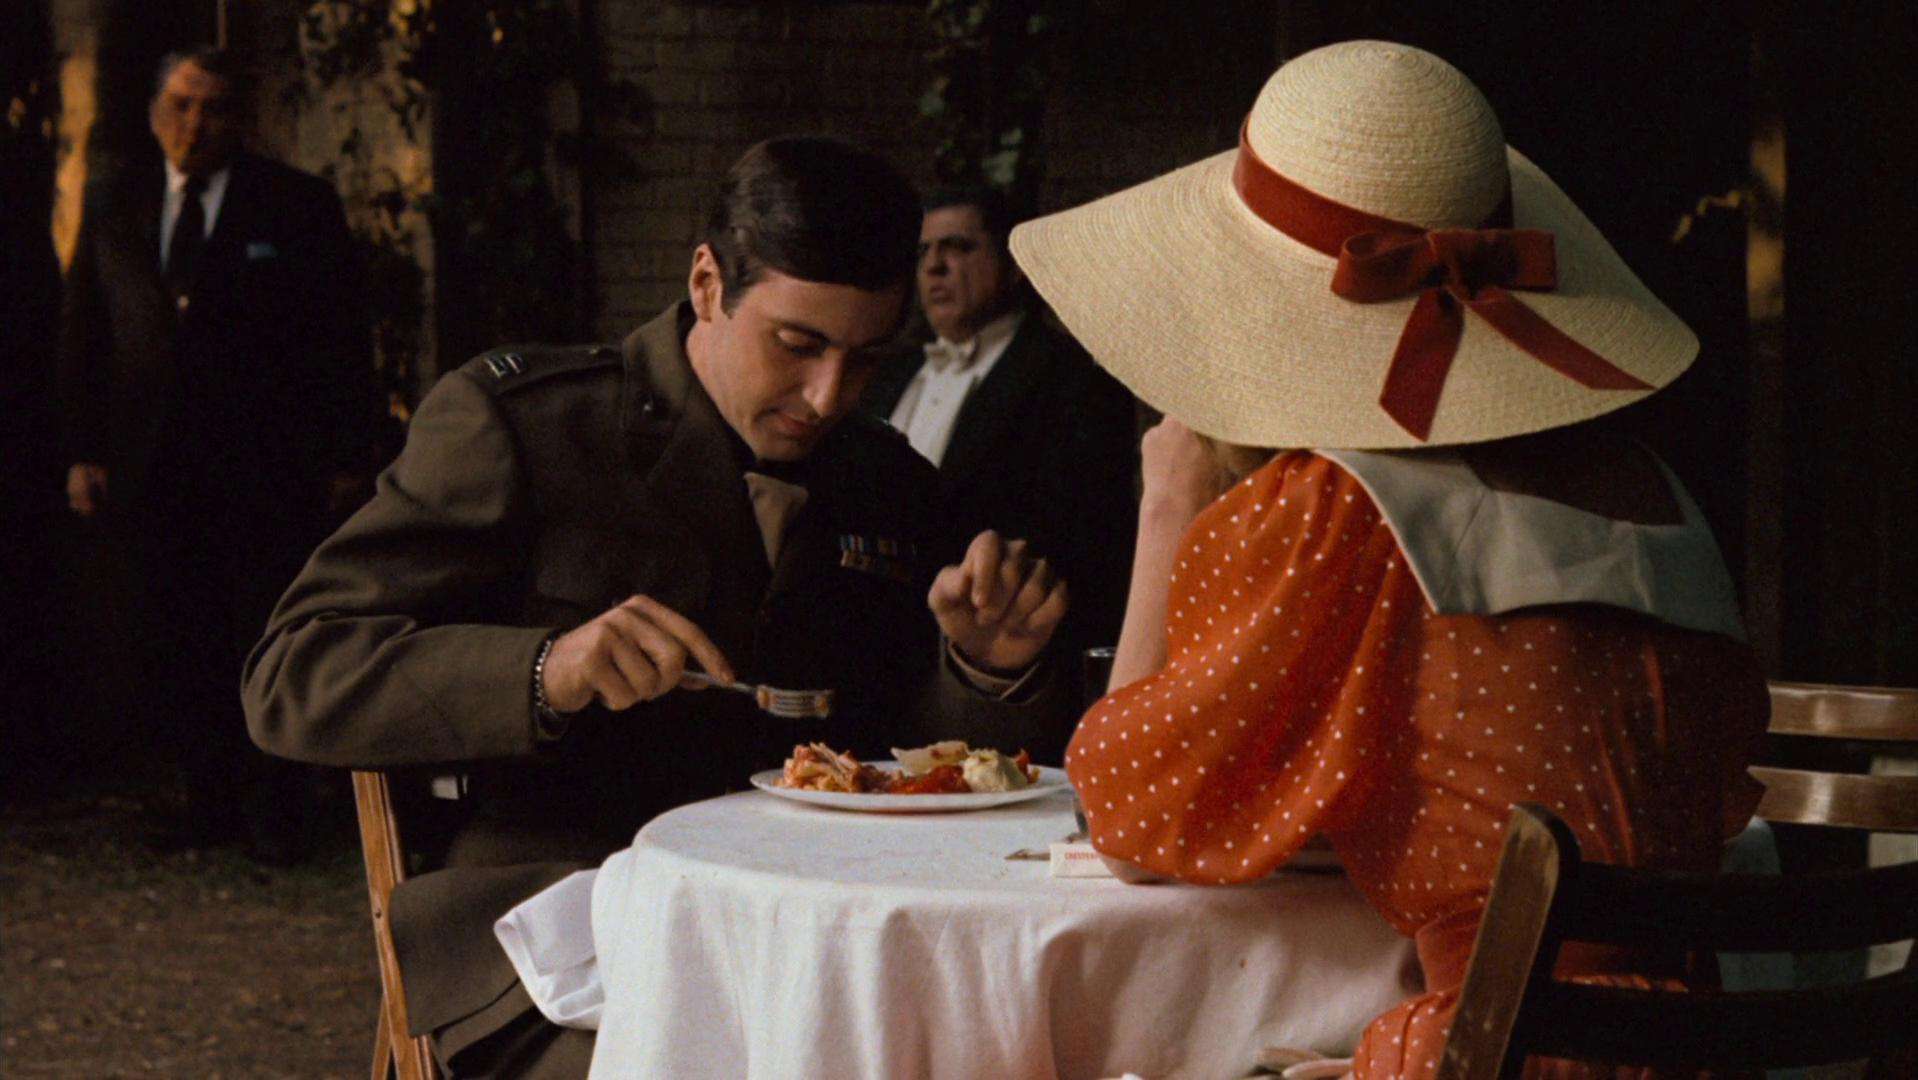 Al Pacino, Diane Keaton, and Lenny Montana in The Godfather (1972)